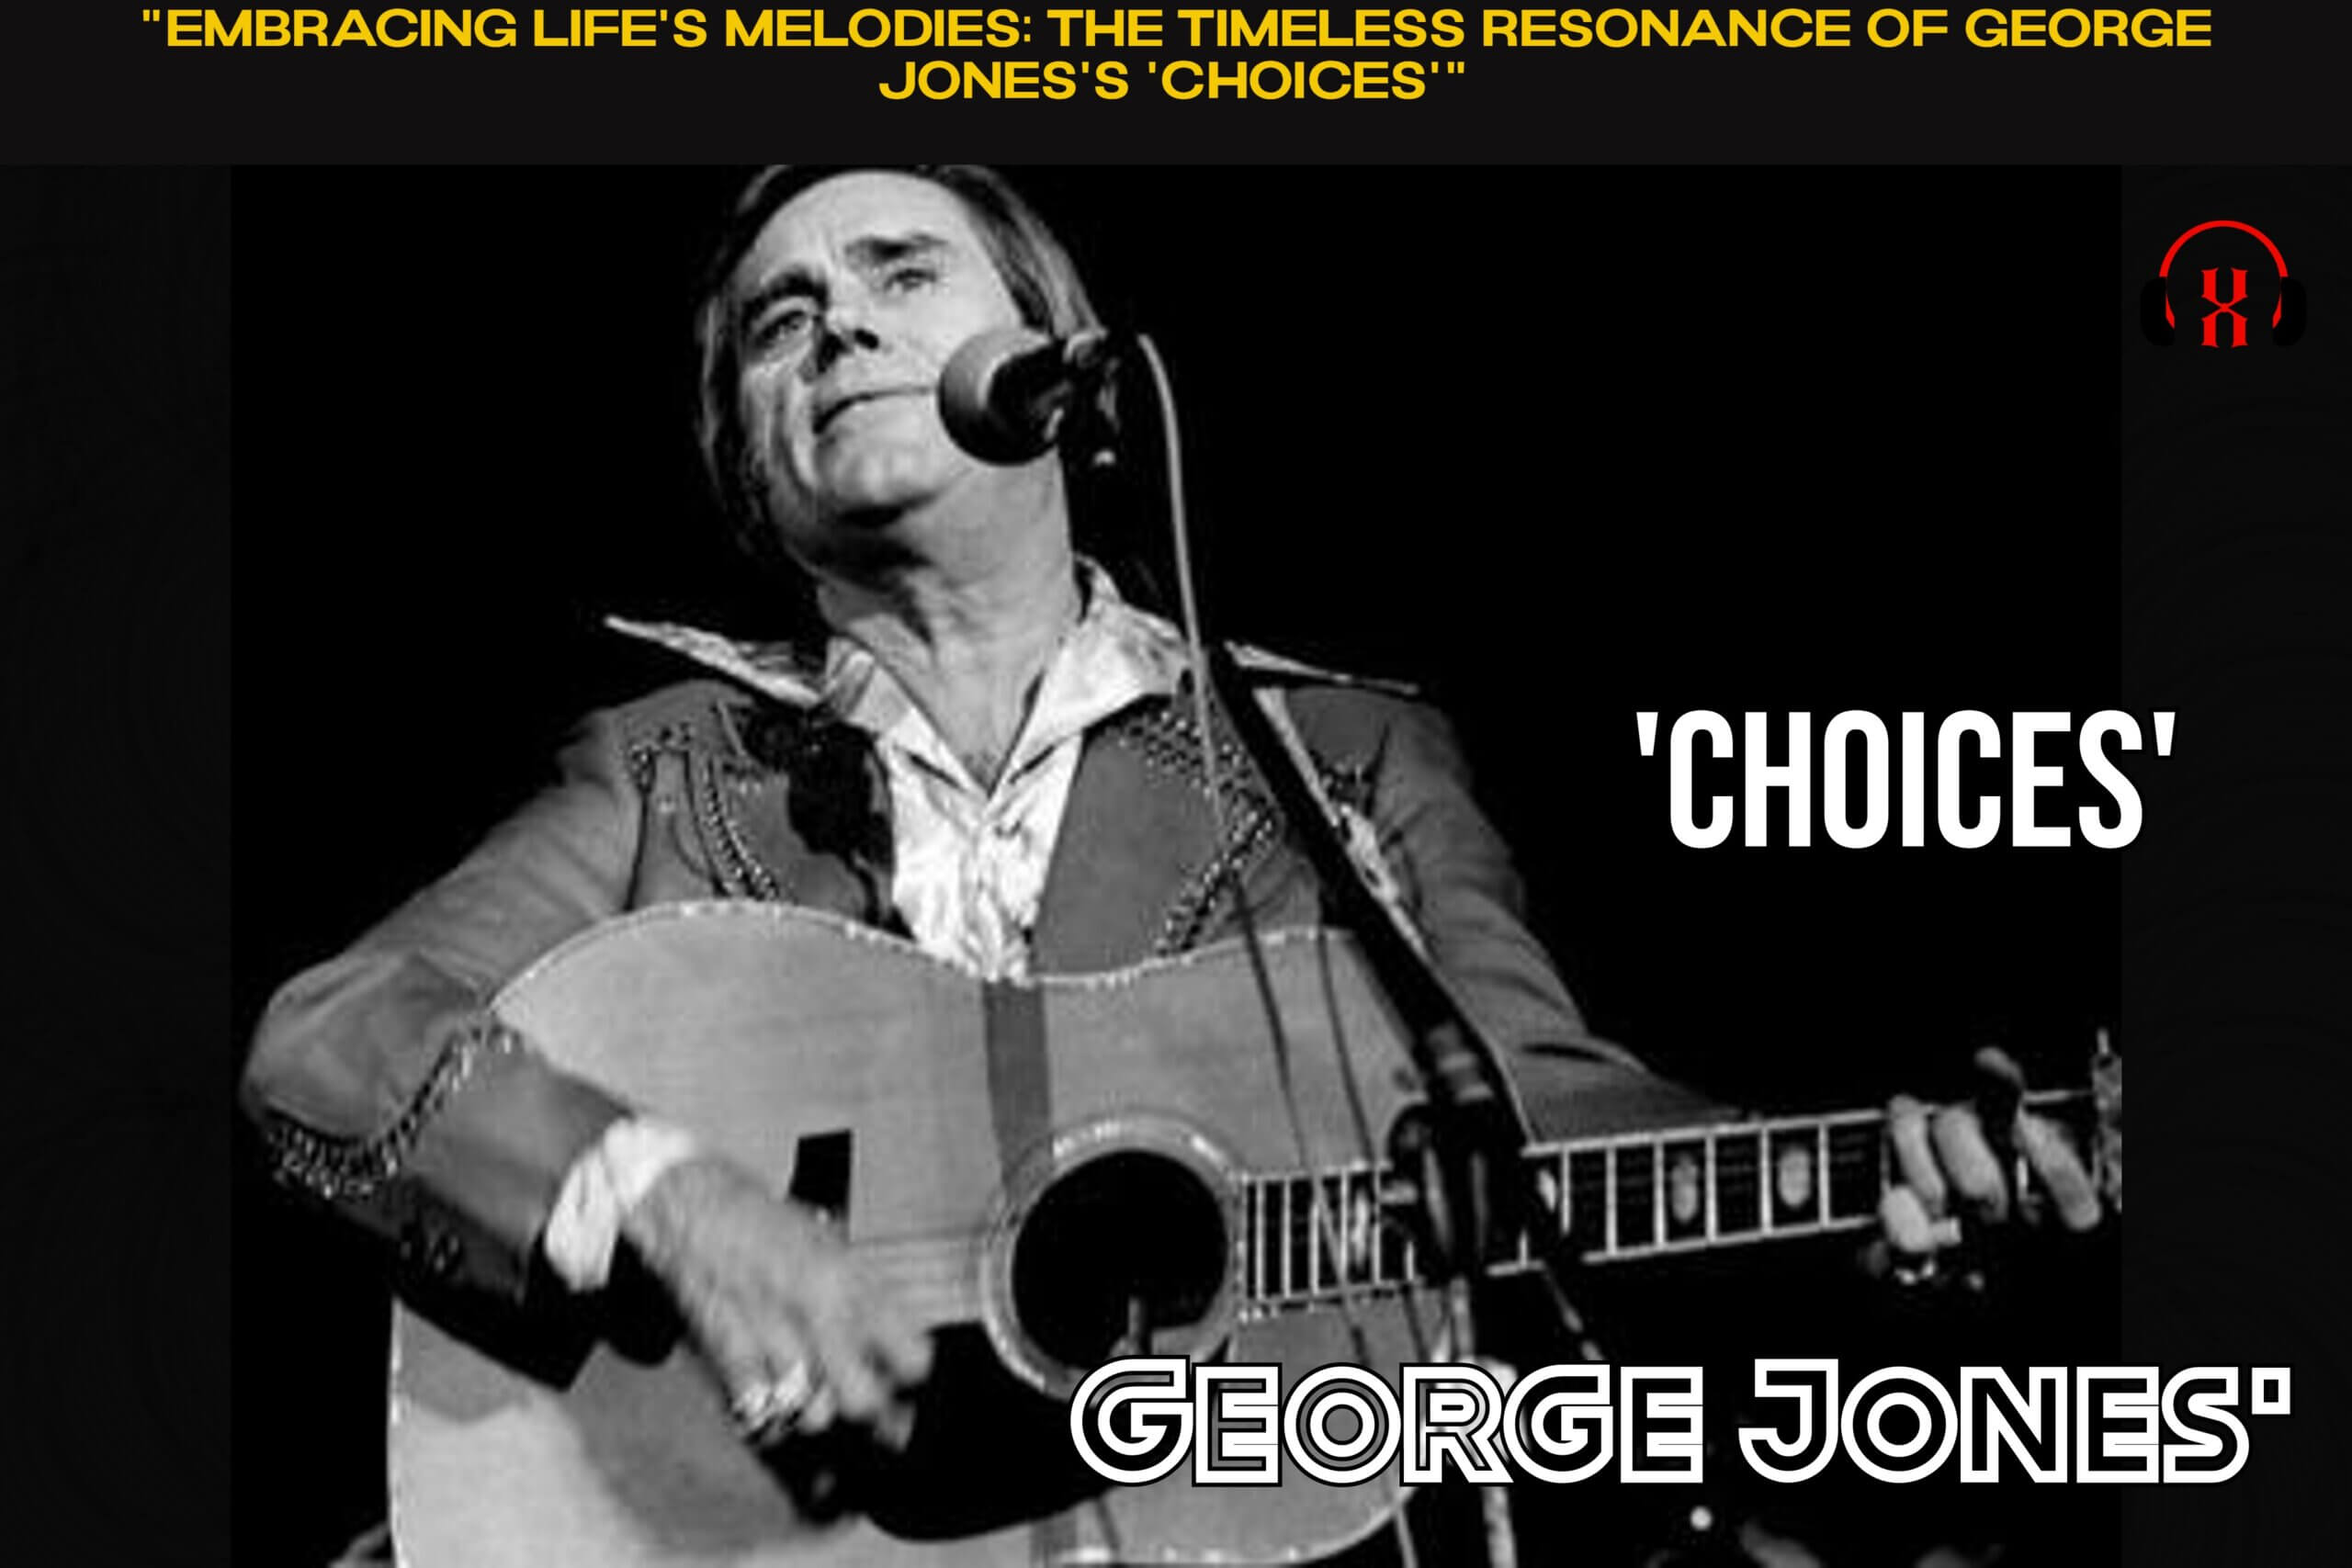 “Embracing Life’s Melodies: The Timeless Resonance of George Jones’s ‘Choices'”